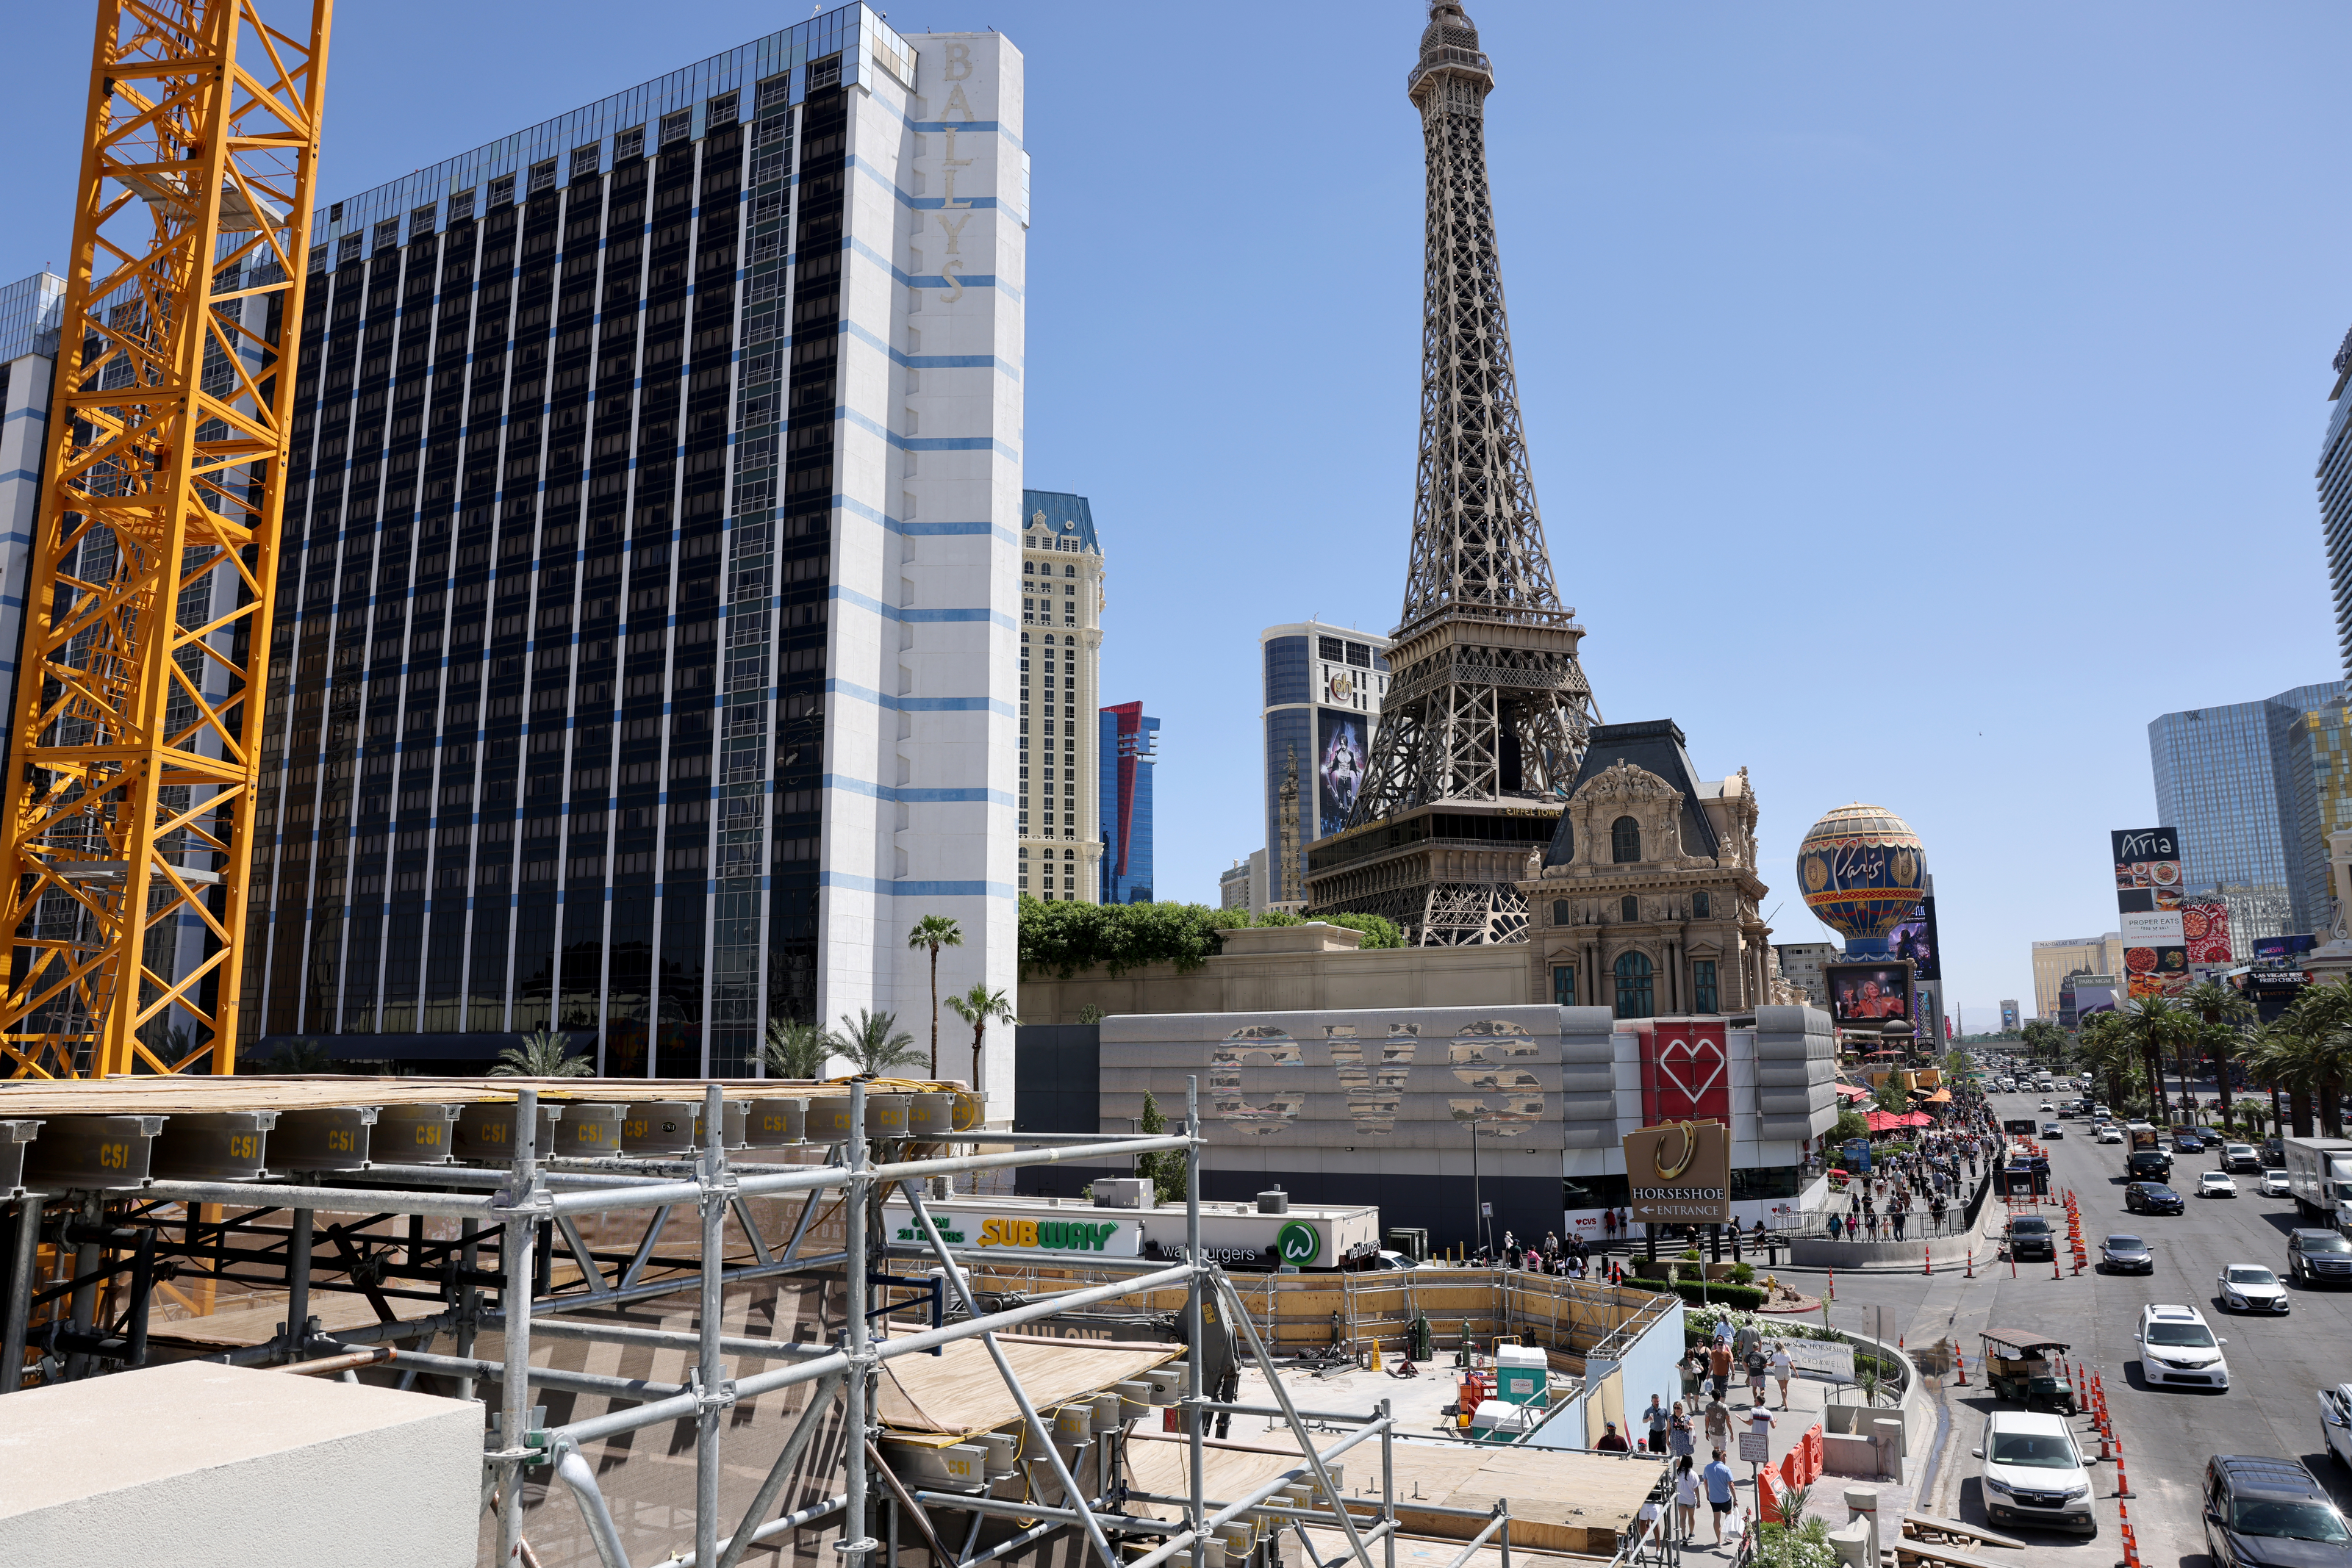 Paris Las Vegas receives a new hotel tower immediately after Caesars task